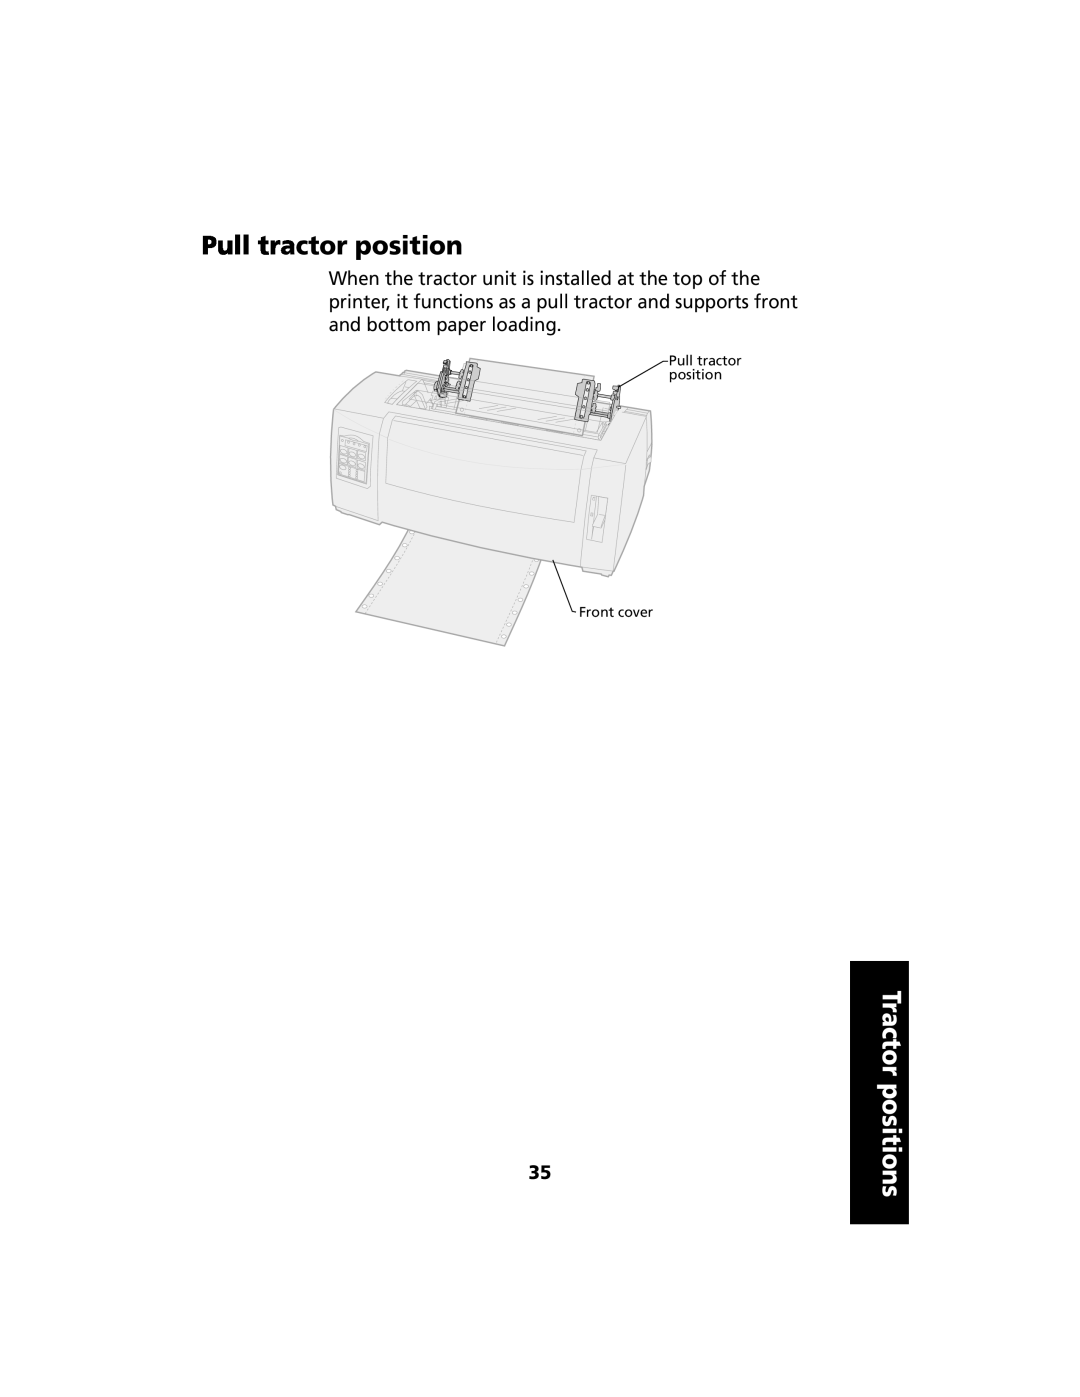 Lexmark 2480 manual Tractor positions, Pull tractor position Front cover 